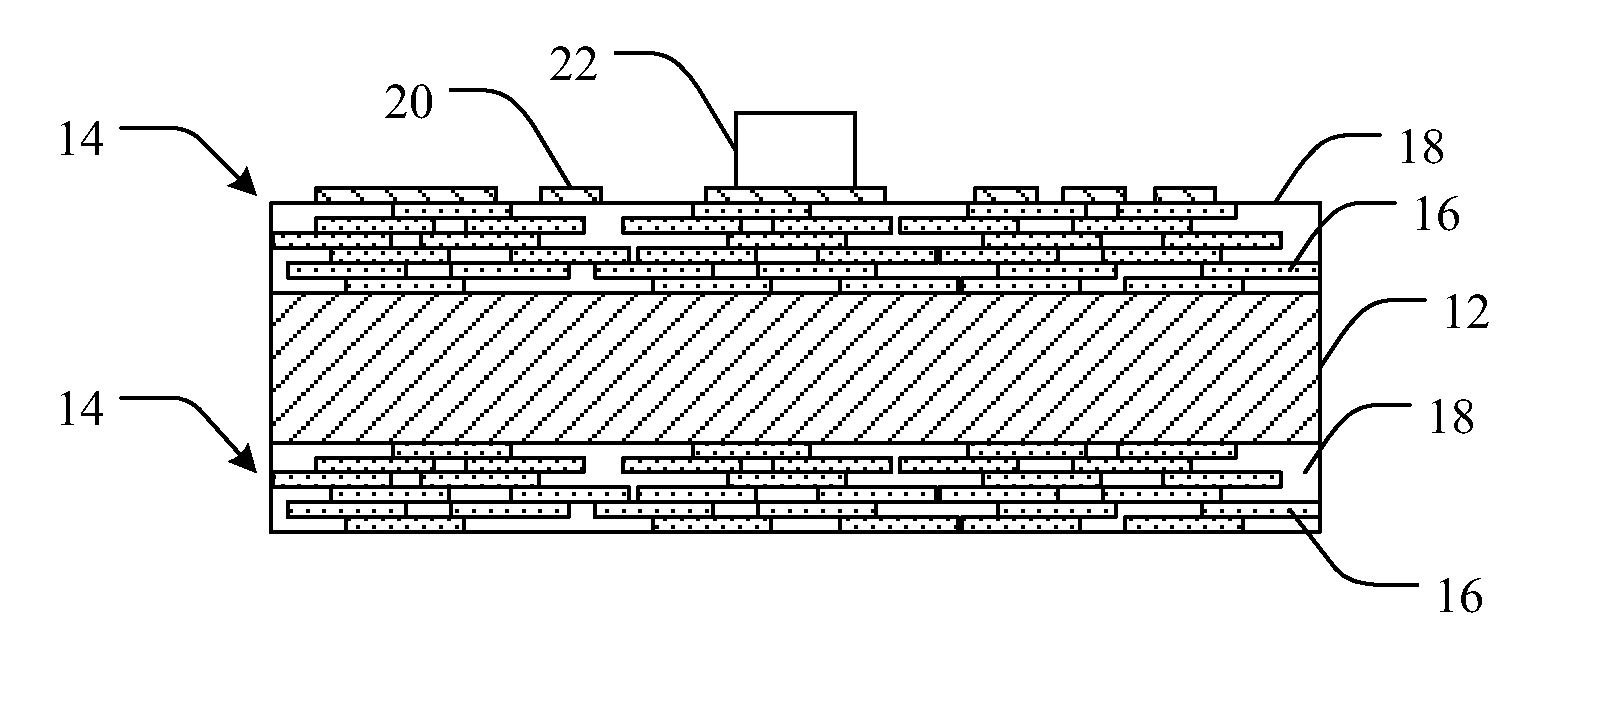 hBN INSULATOR LAYERS AND ASSOCIATED METHODS